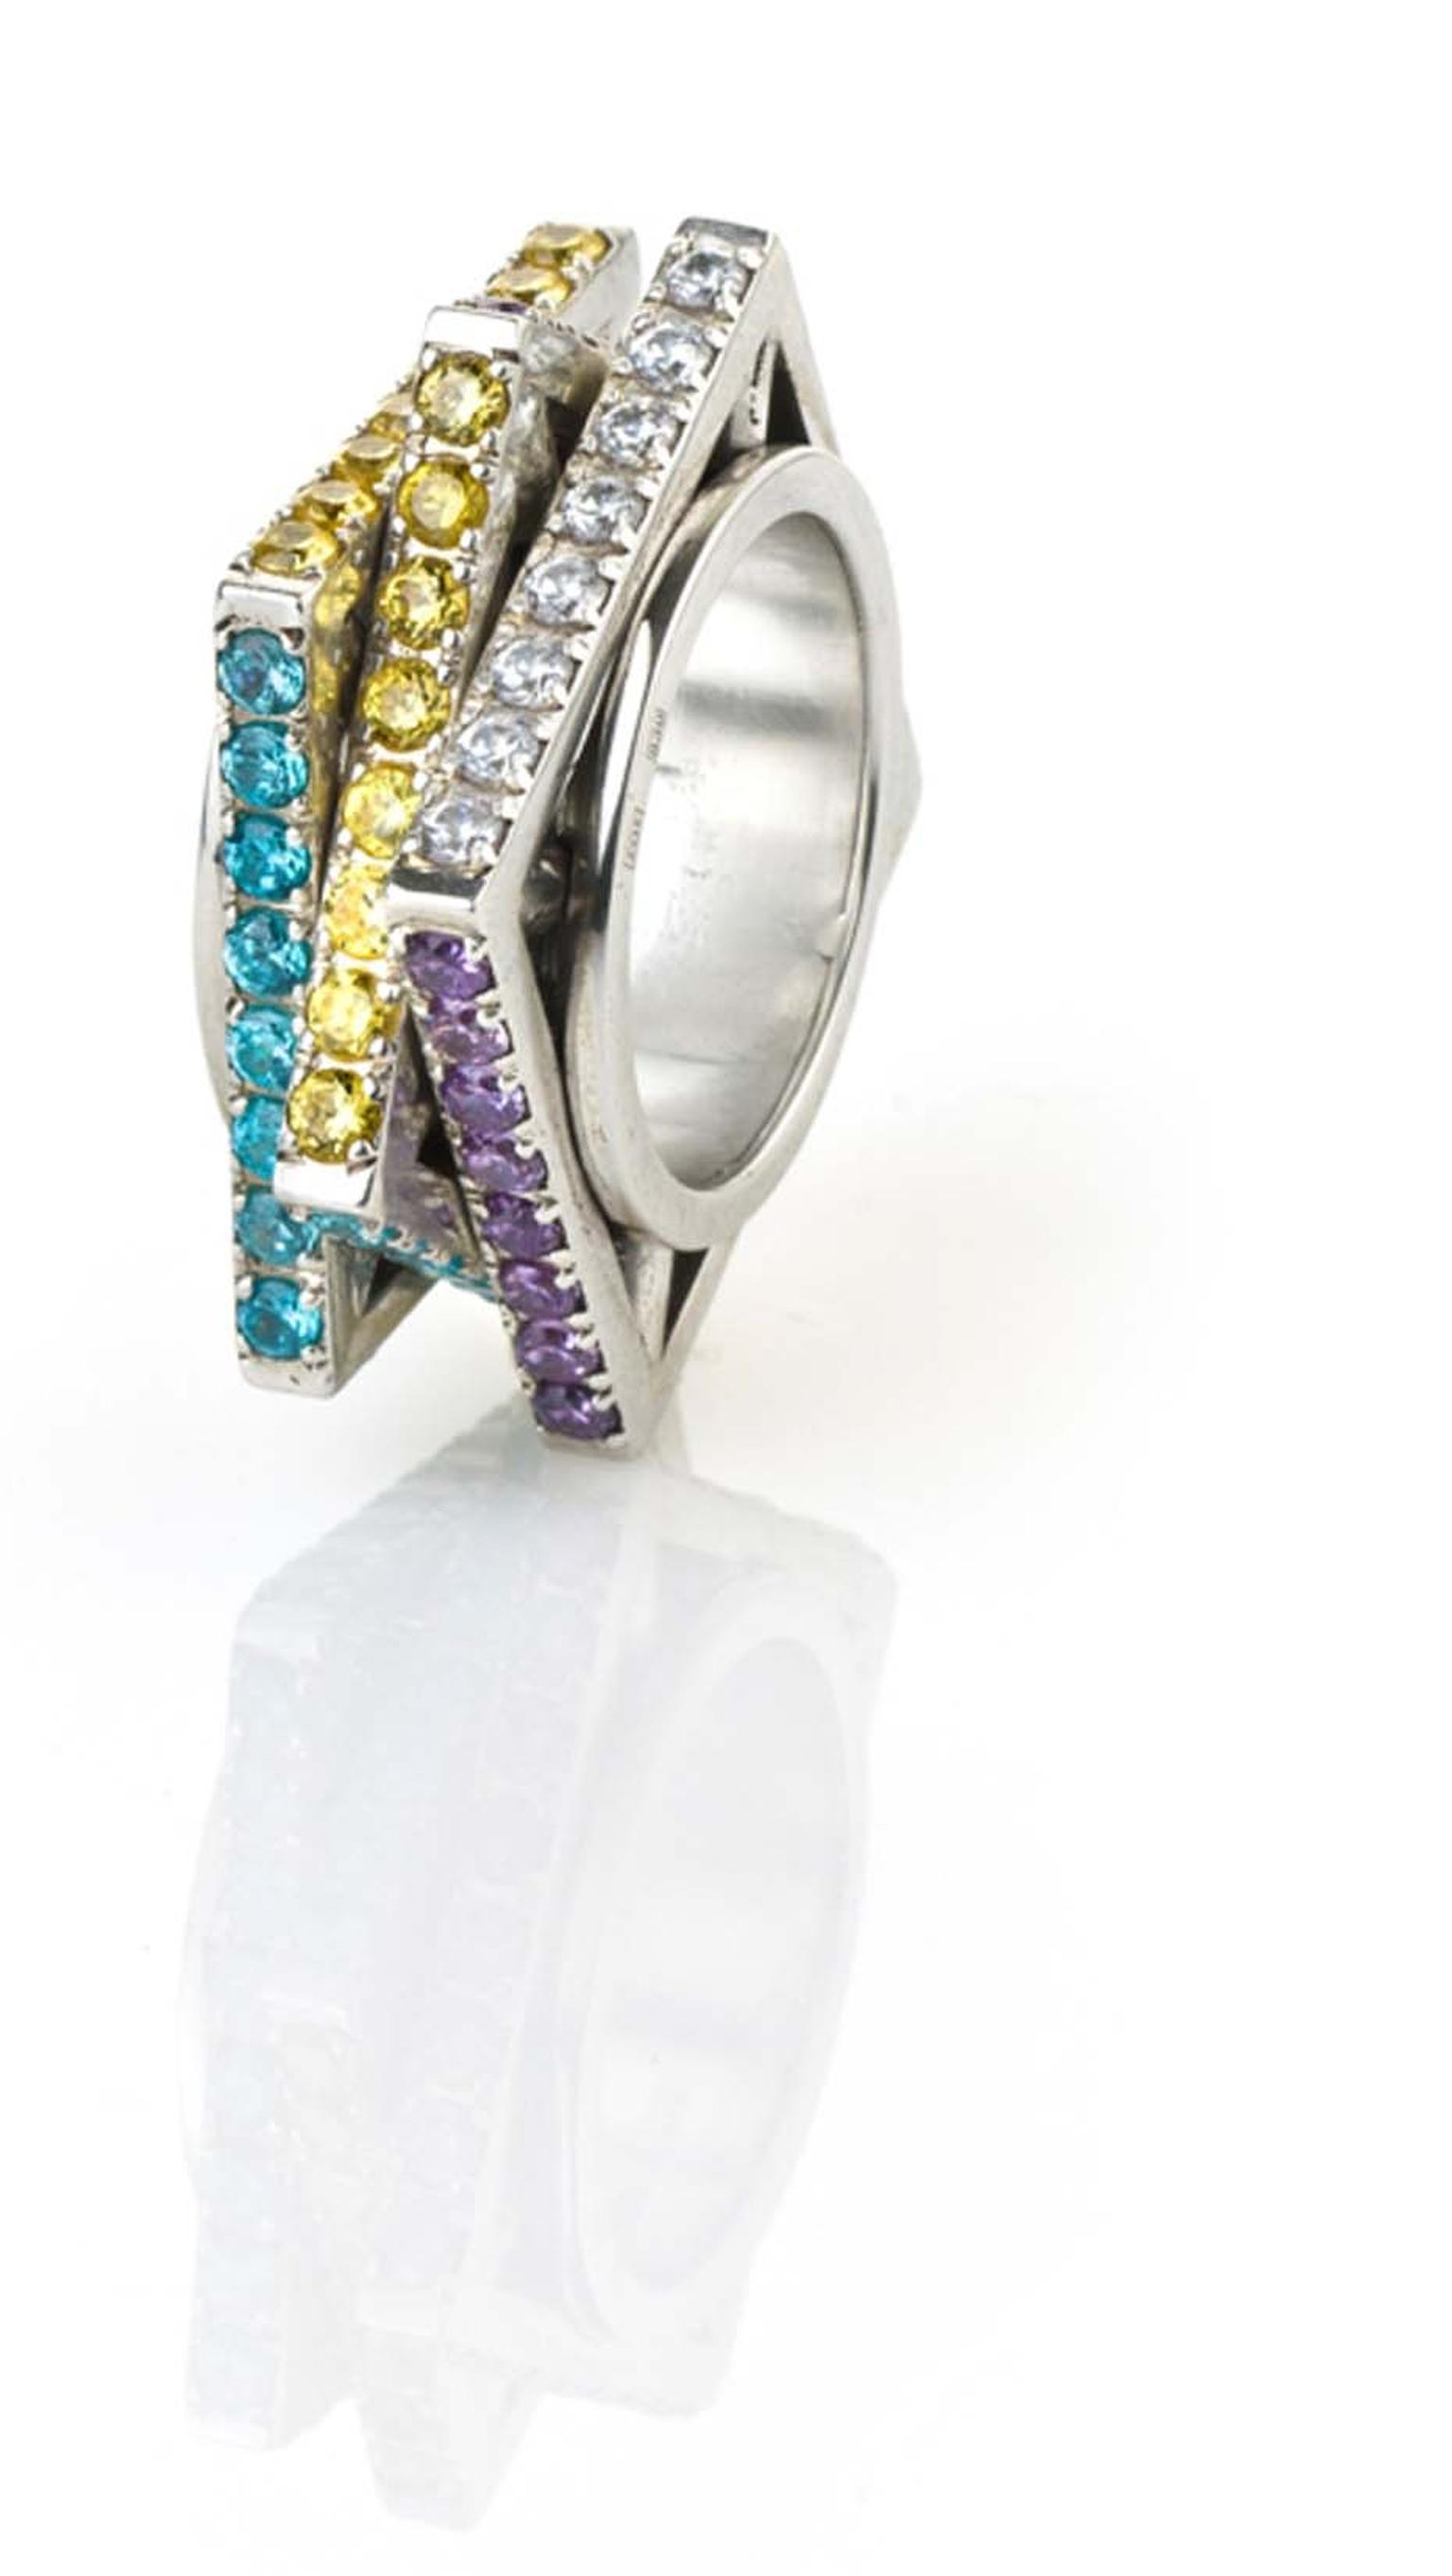 MyriamSOS Look 2 of the Rubik's Cube ring is a more playful variation which can be easily turned like a rubiks cube.